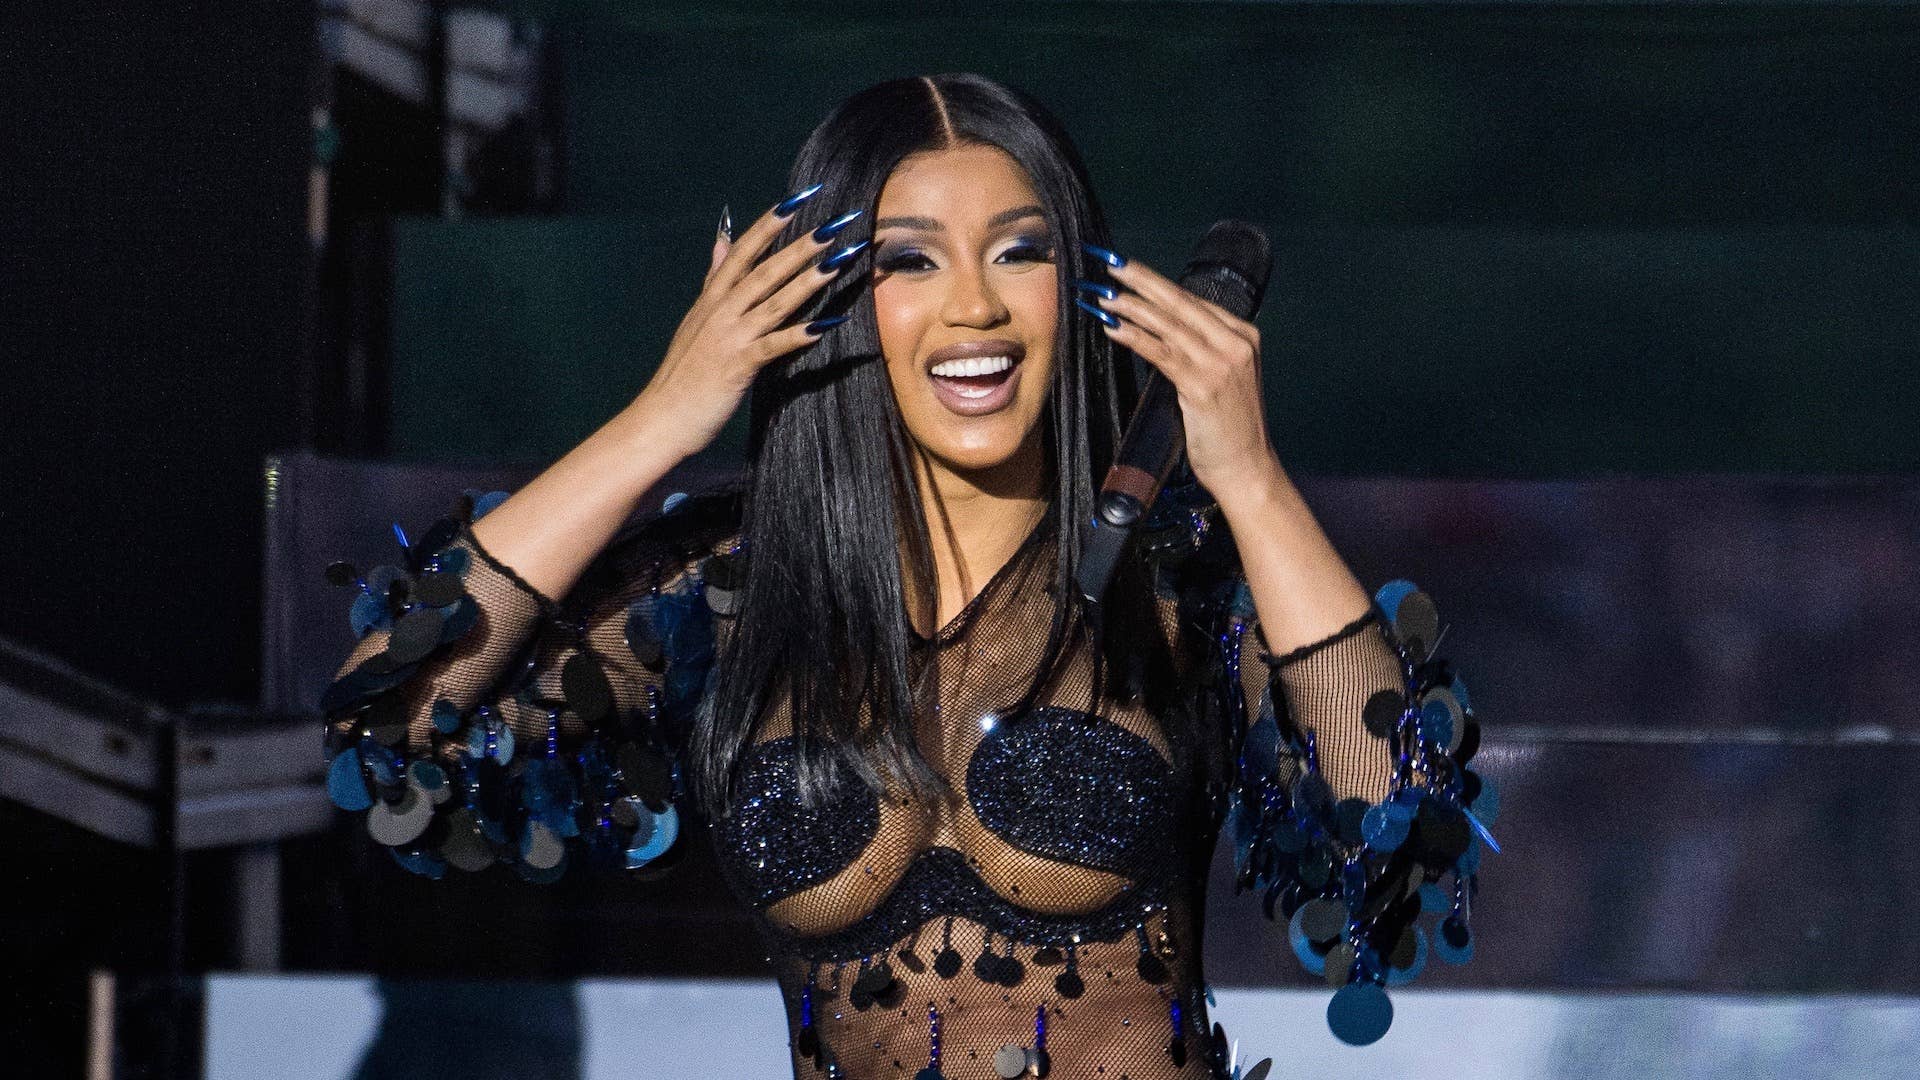 Cardi B performs on the main stage during Wireless Festival